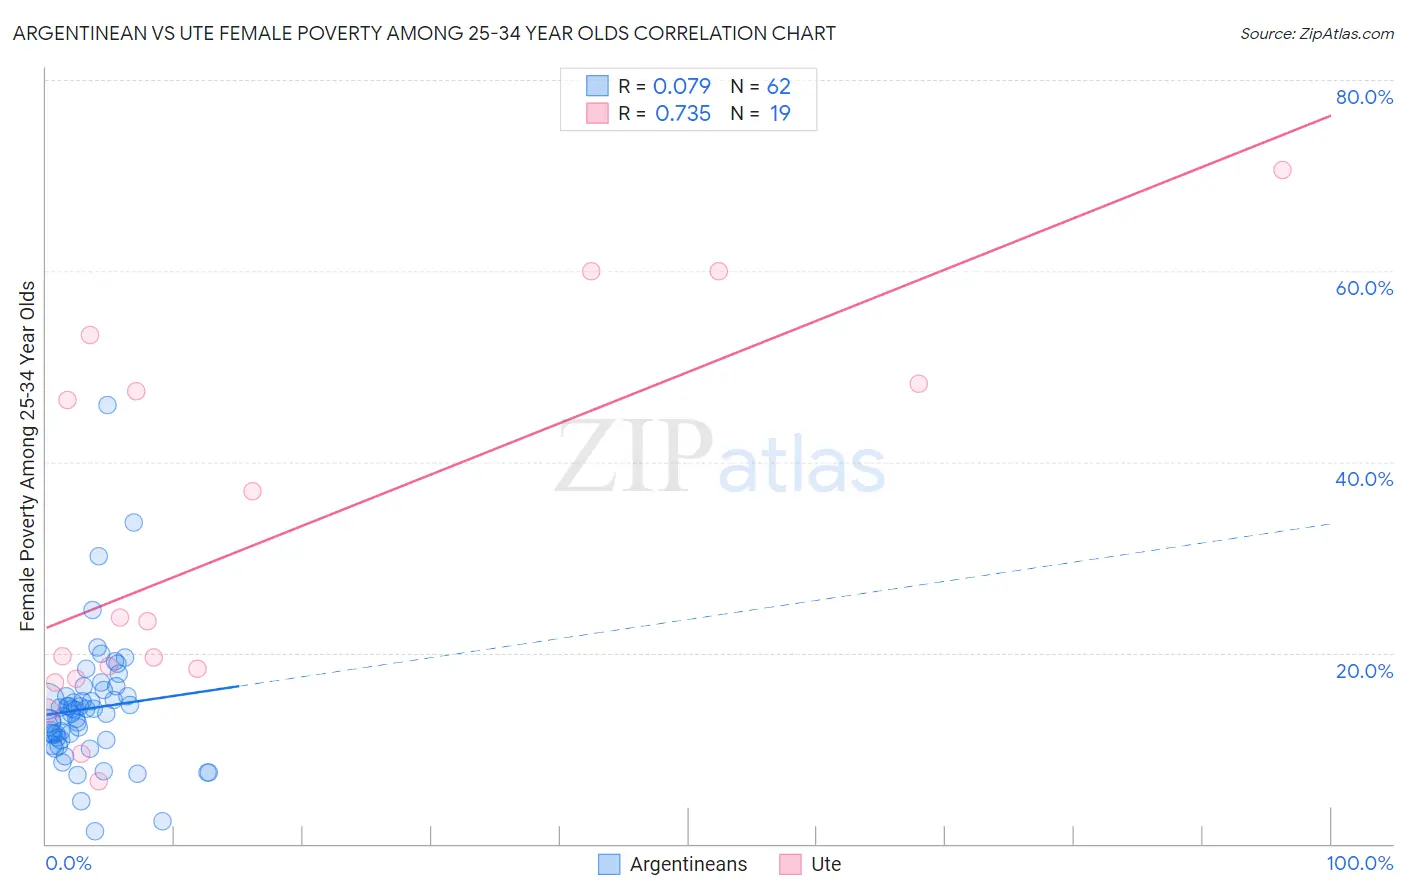 Argentinean vs Ute Female Poverty Among 25-34 Year Olds